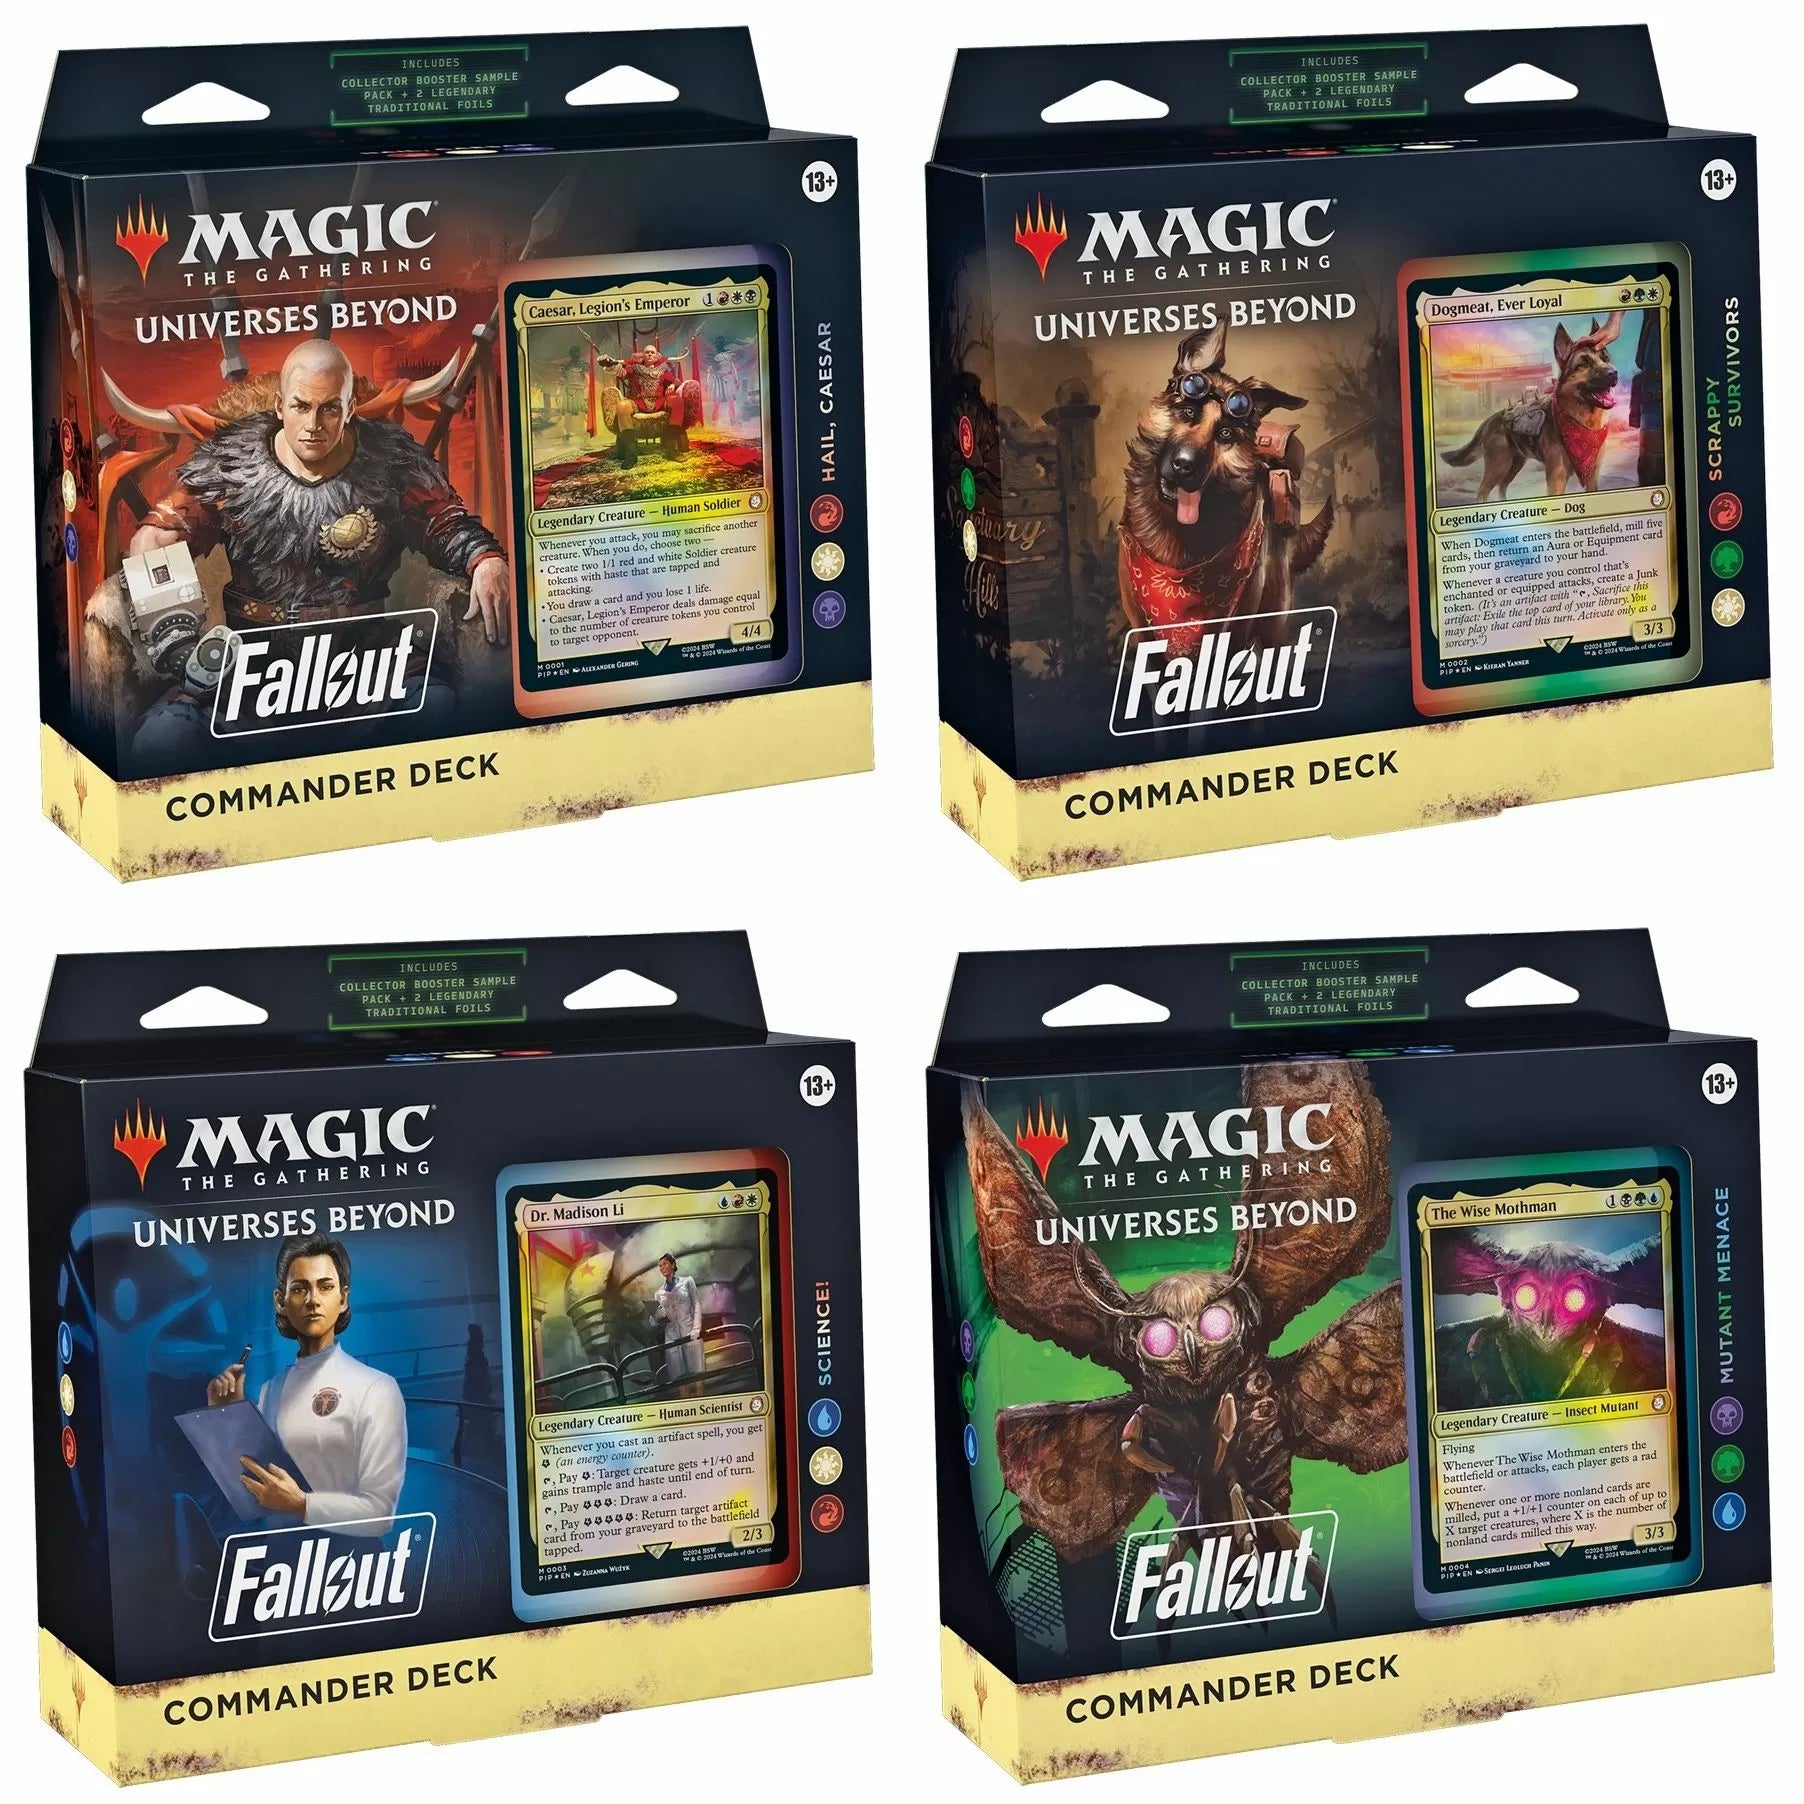 Magic The Gathering Fallout Commander Deck Display (Set of 4)